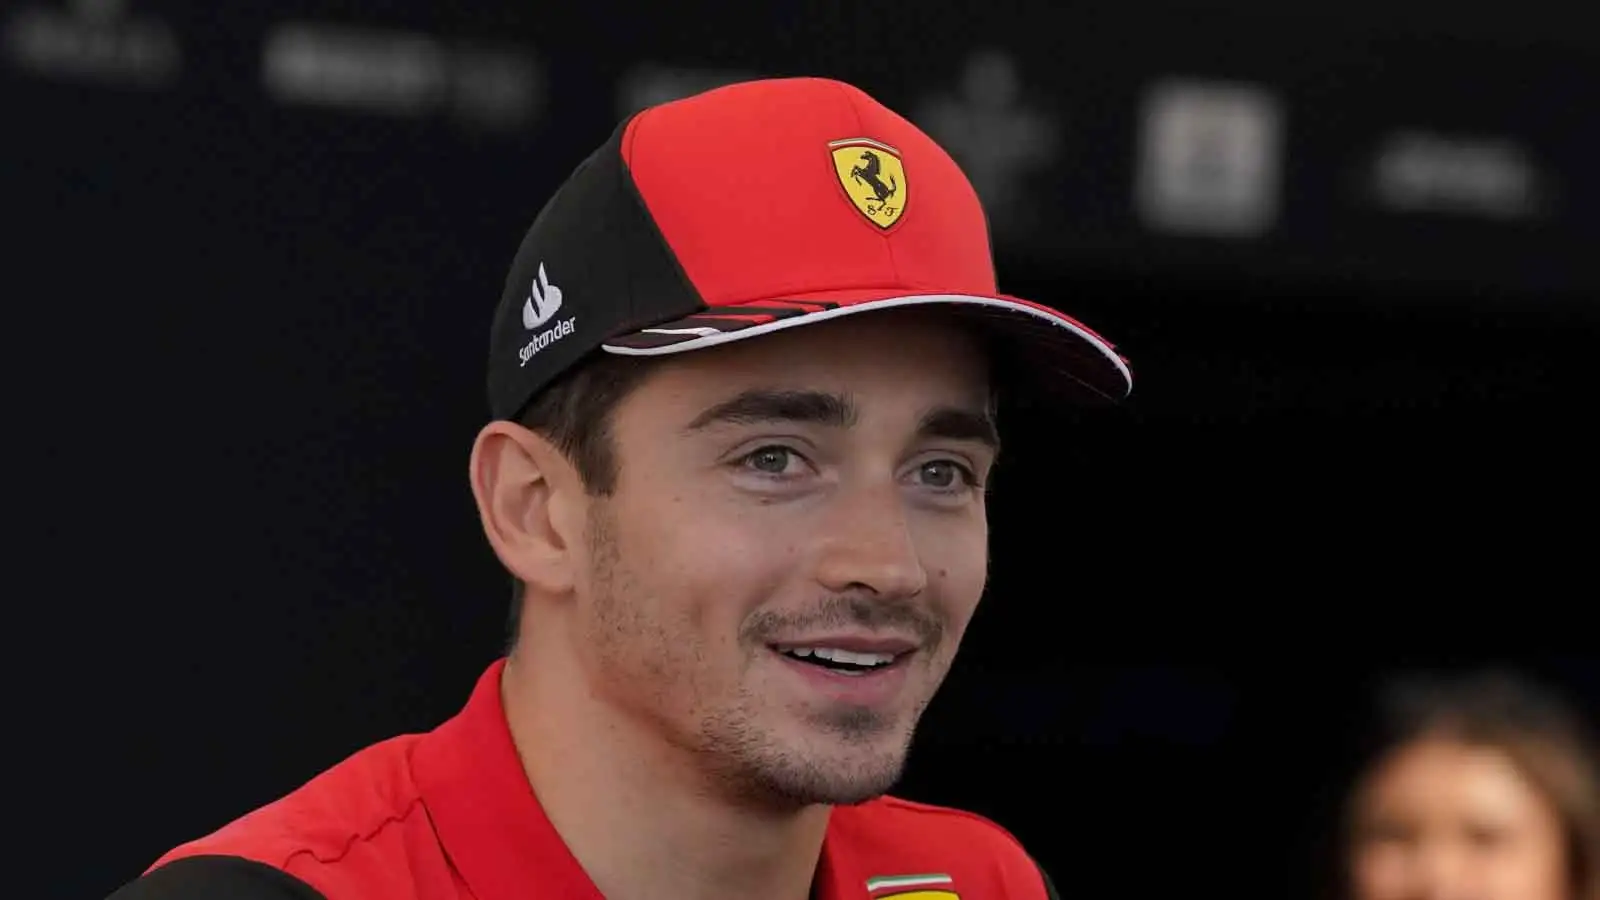 Charles Leclerc is interviewed. Austin October 2022.